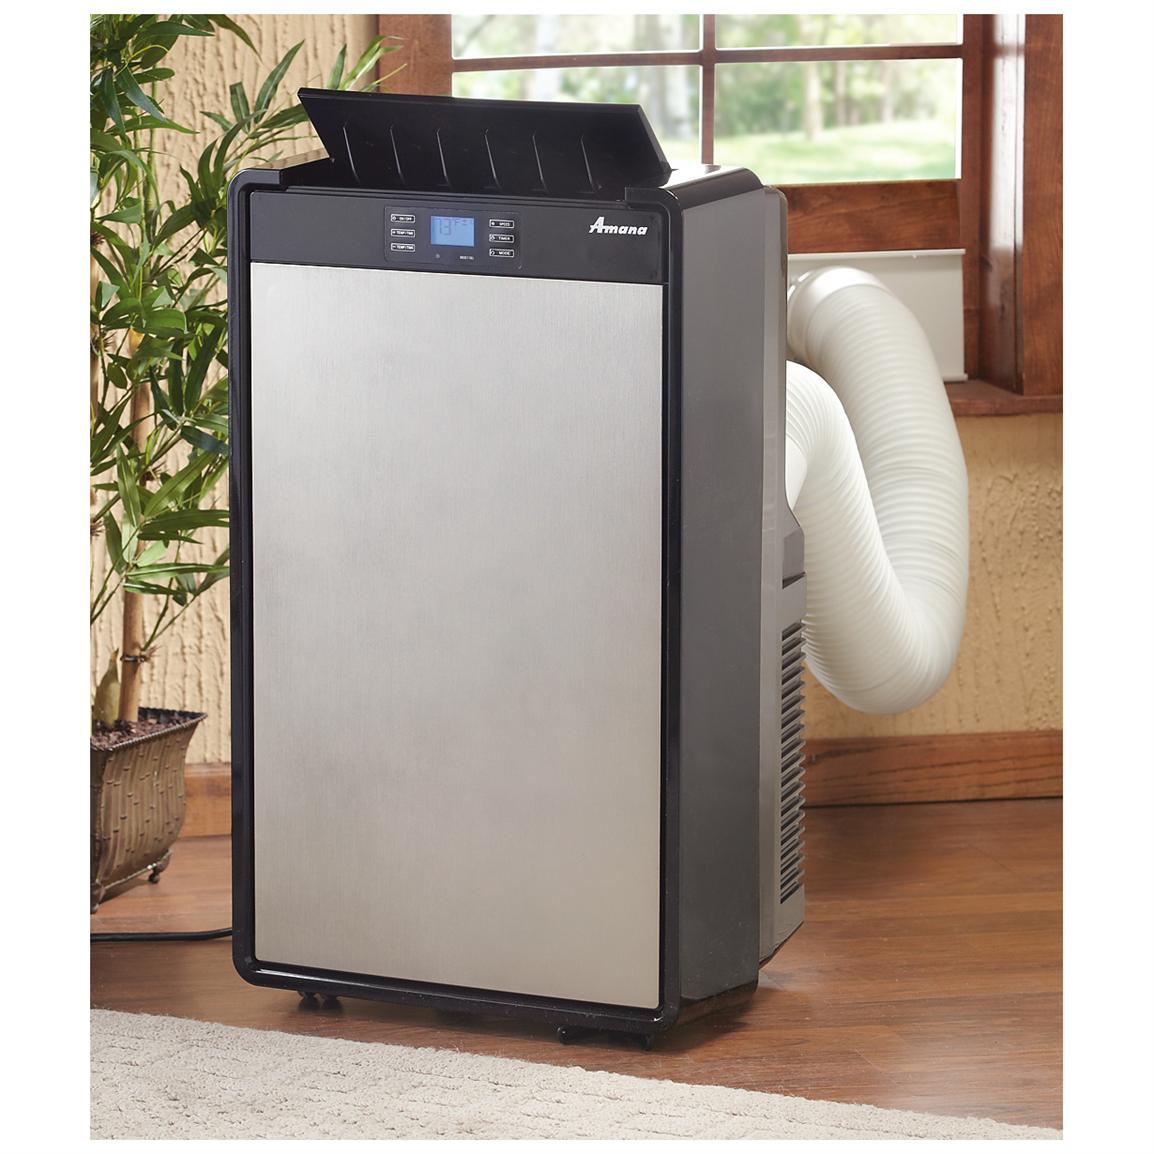 New Portable Air Conditioner Standards - AC-World